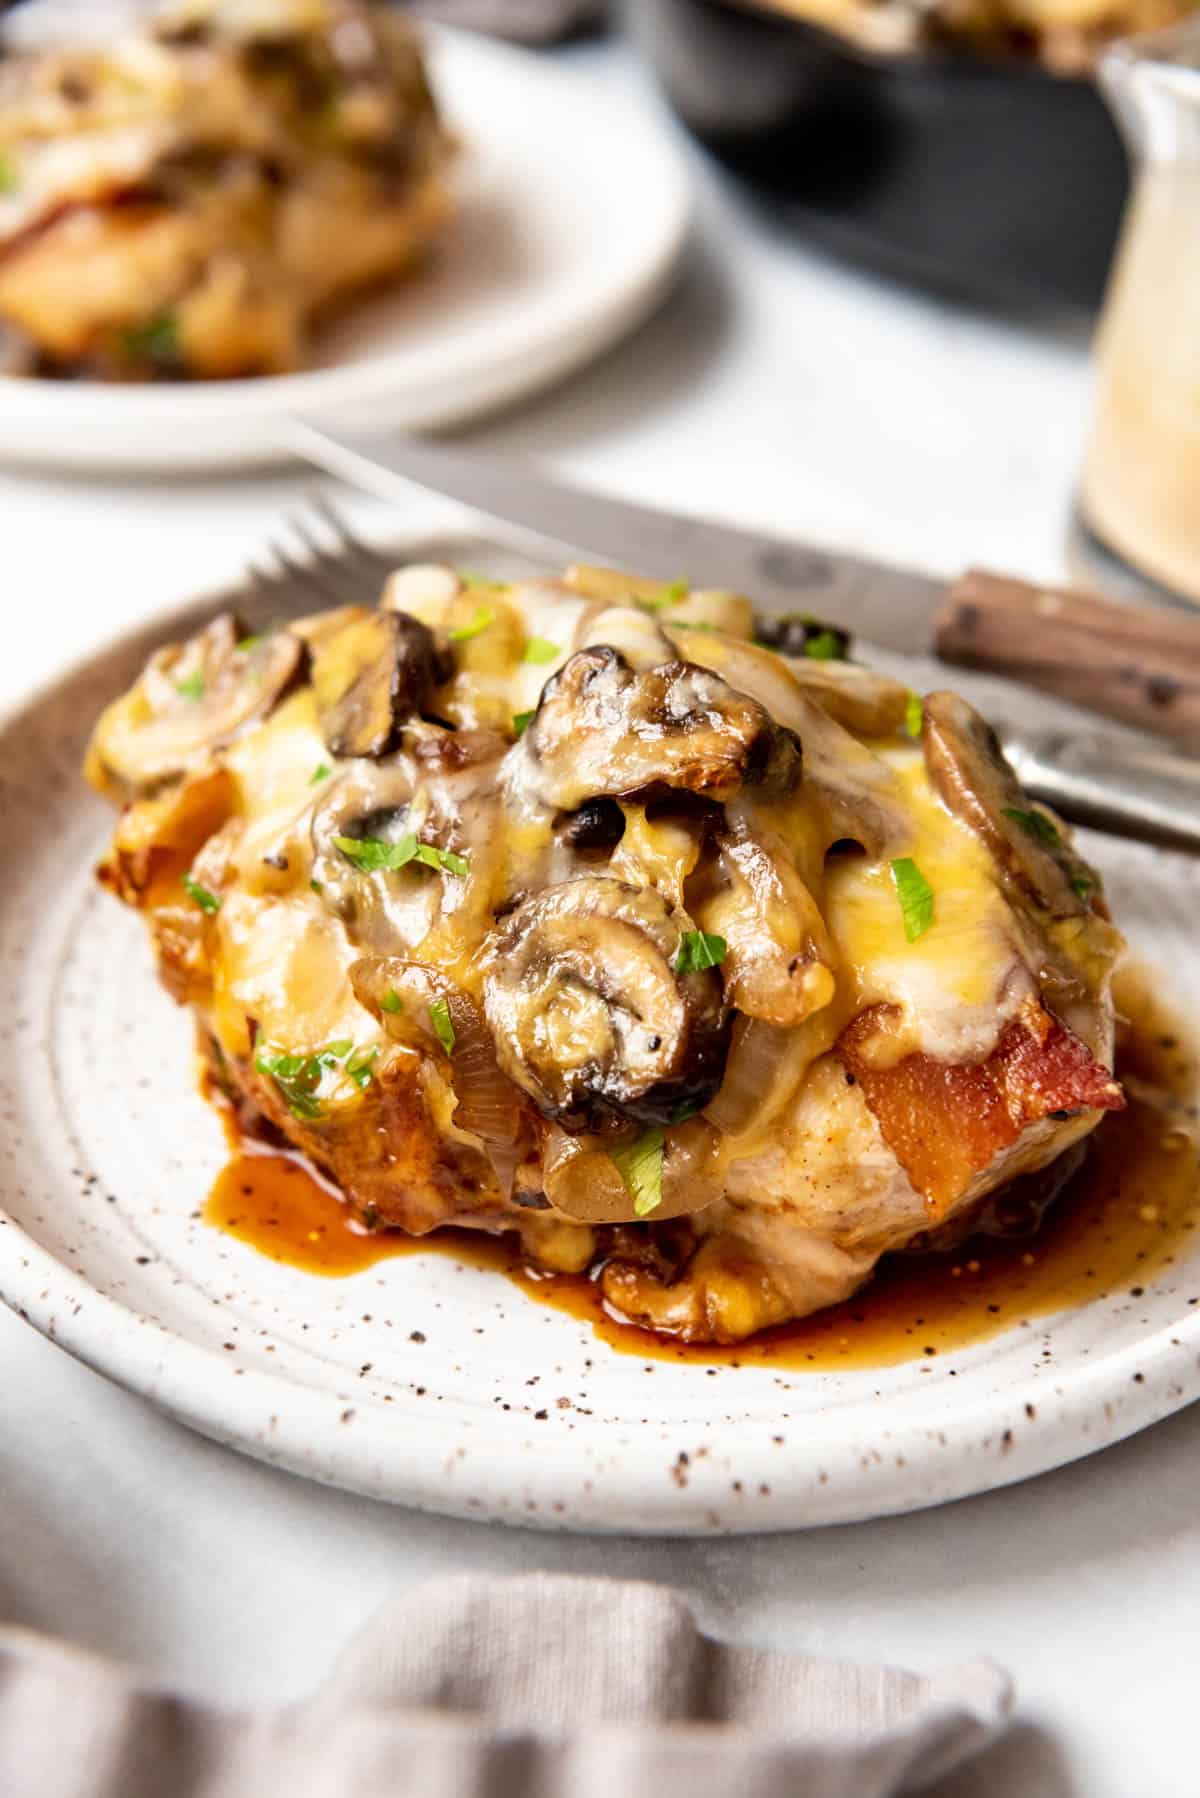 A copycat Outback Alice Springs chicken recipe on a plate with sauteed mushrooms, onions, and cheese.